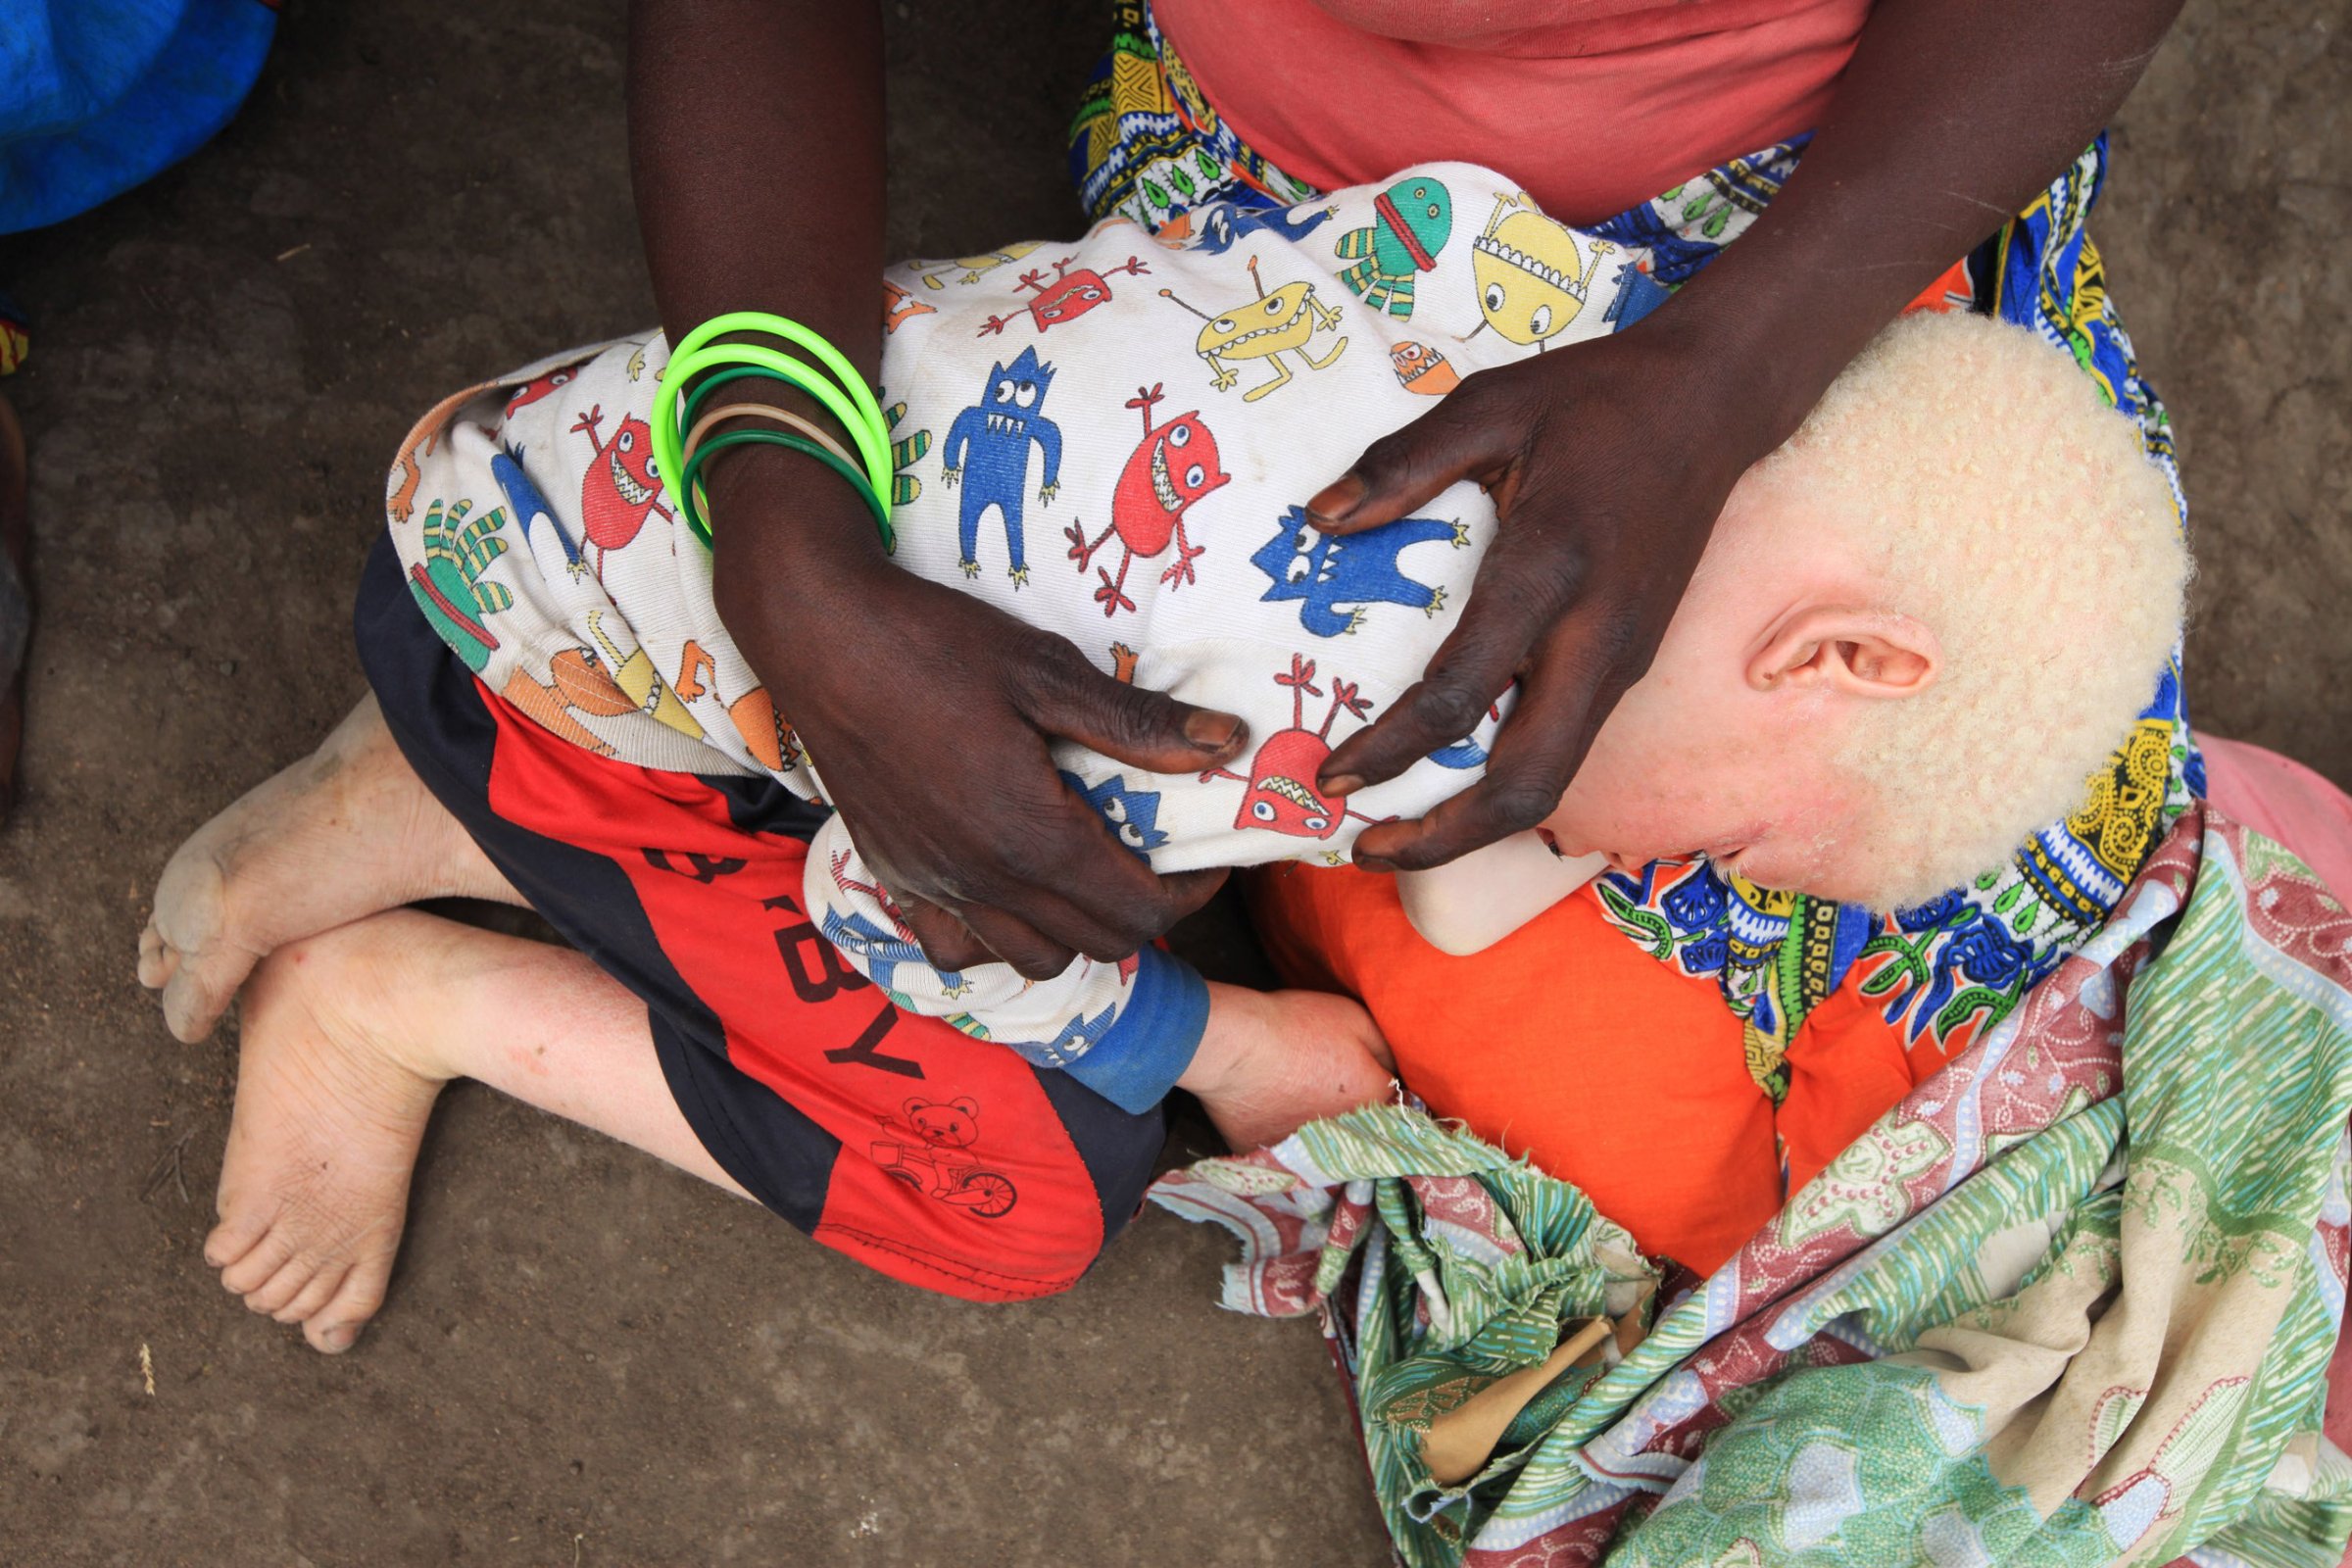 Edna Cedrick, 26, holds her surviving albino son after his twin brother who had albinism was snatched from her arms, in Machinga north east of Blantyre, Malawi, May, 24, 2016.